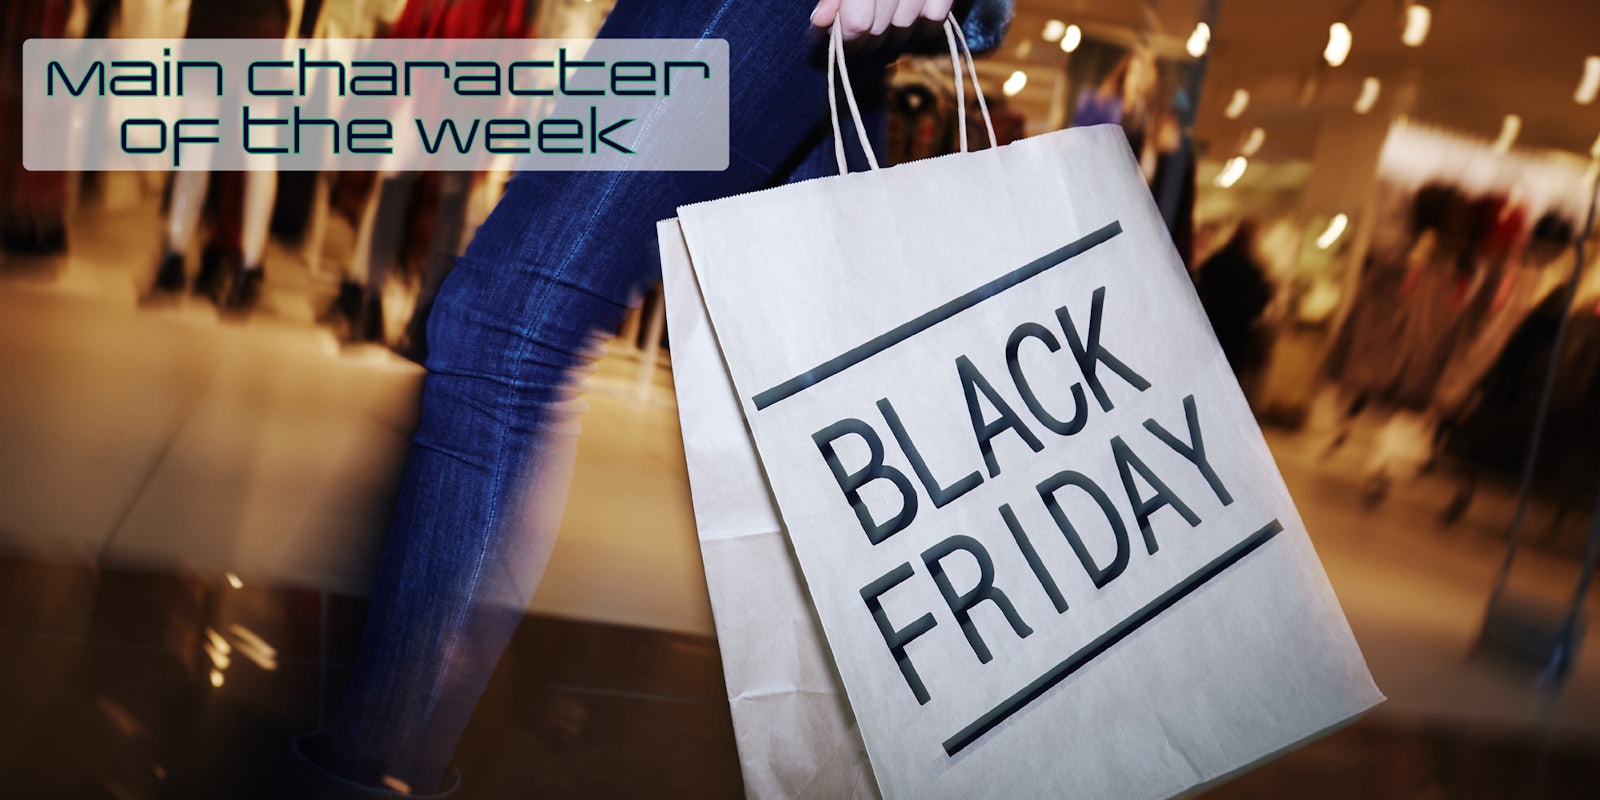 A person holding a bag that says Black Friday on it. There is text that says 'Main Character of the Week' in the top left corner in the web_crawlr font.